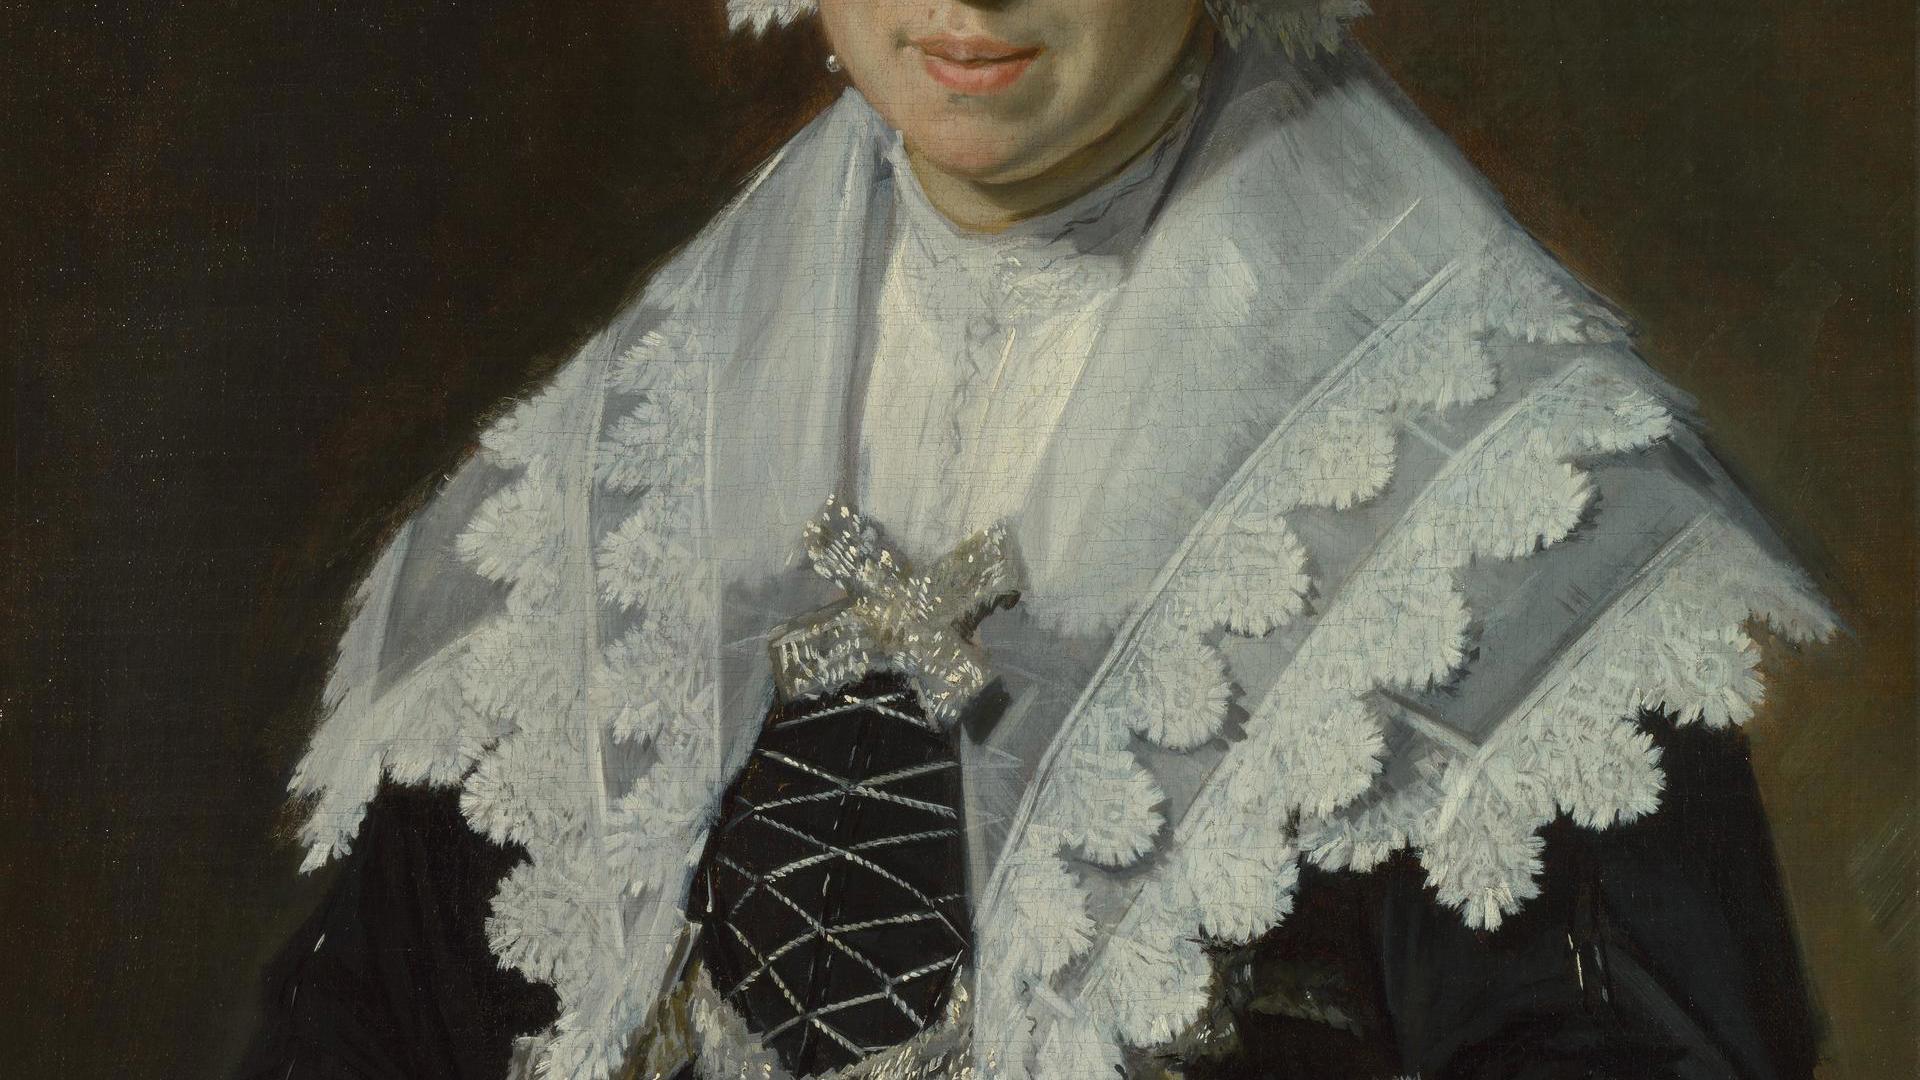 Portrait of a Woman with a Fan by Frans Hals